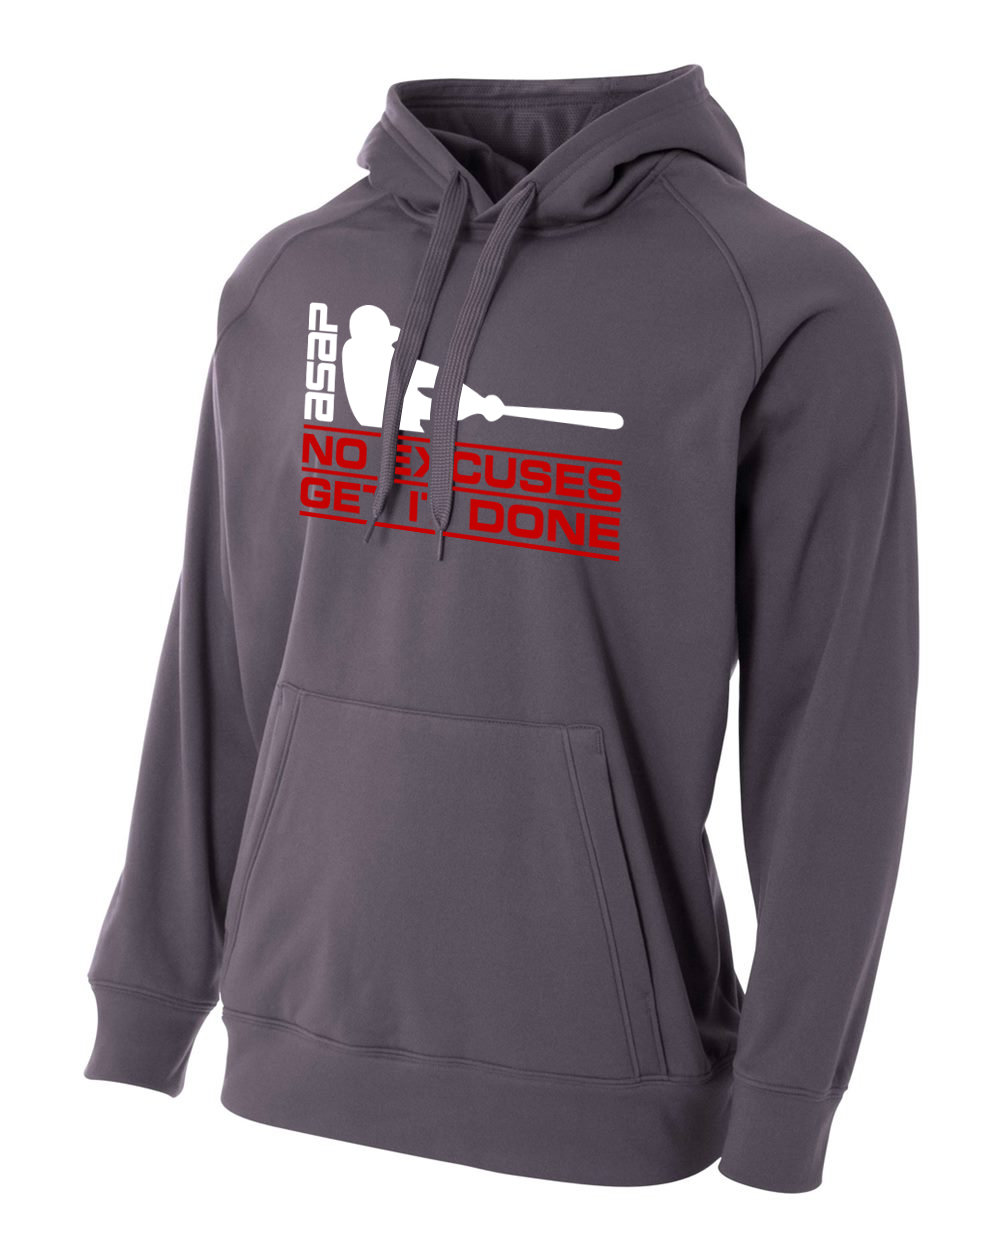 YOUTH ASAP No Excuses Get It Done Solid Tech Fleece Hoodie